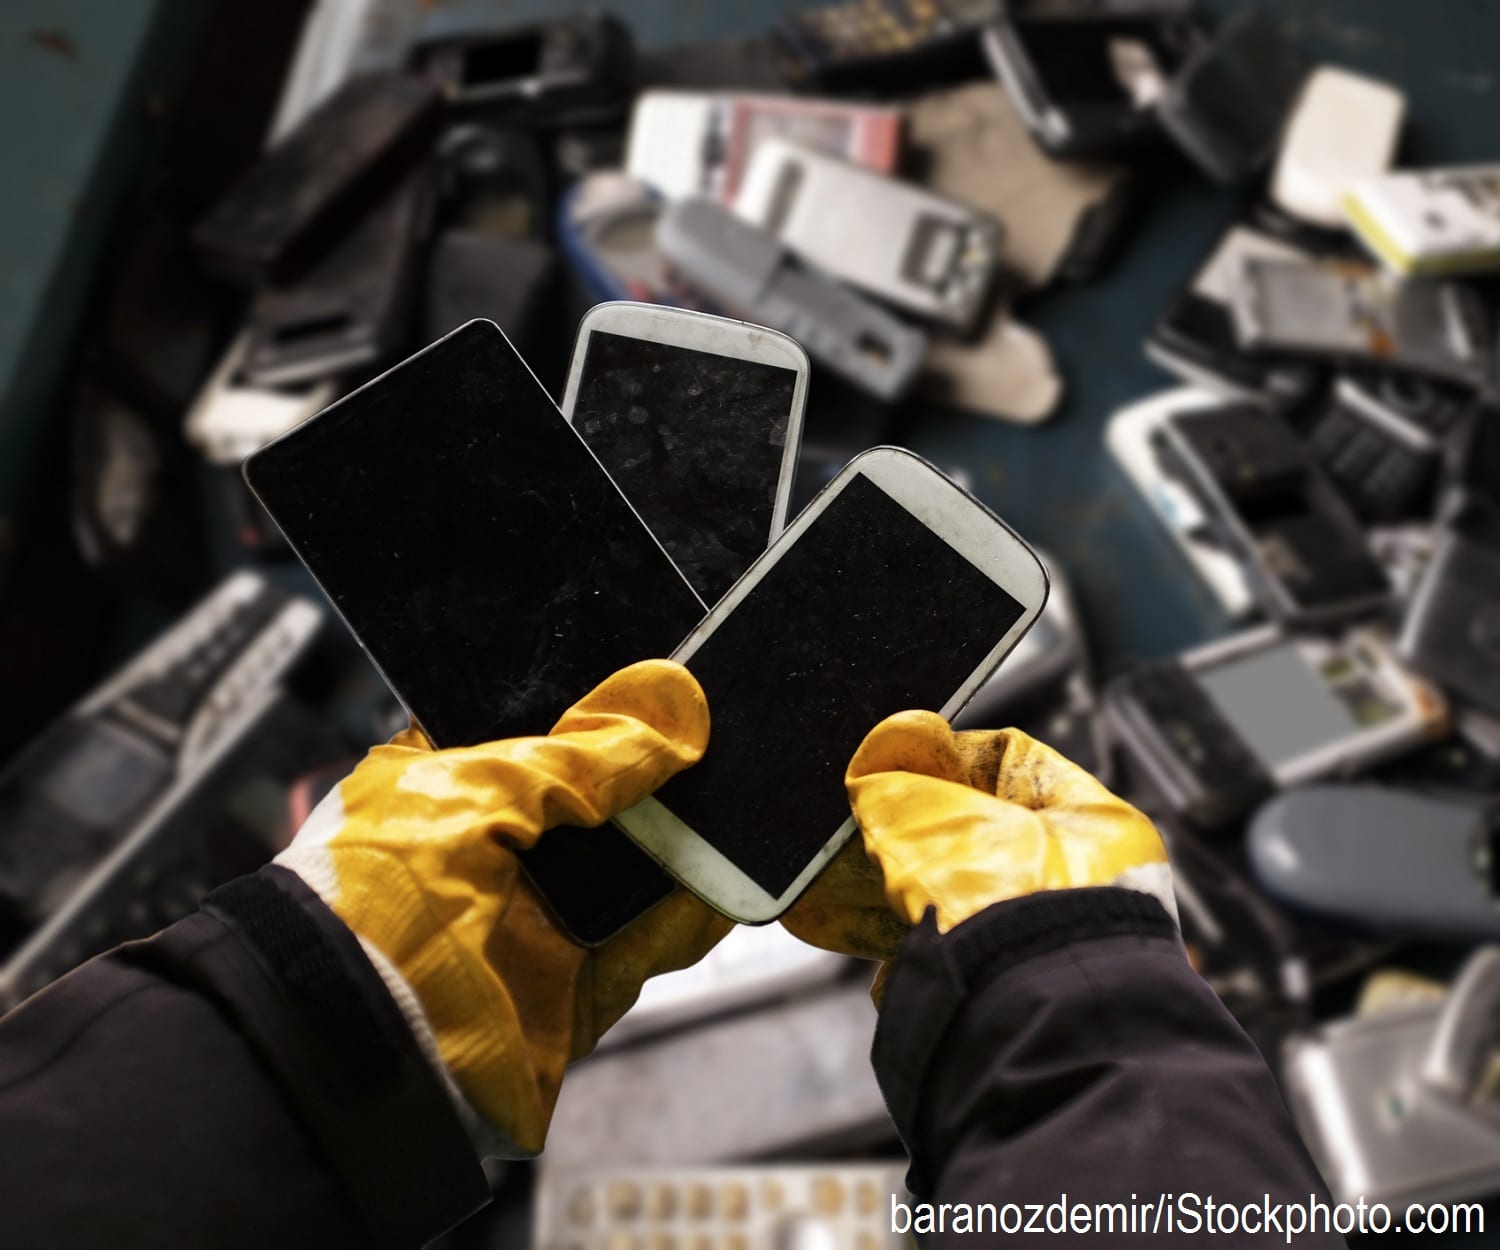 A worker holding cell phones and other electronics, e-waste ready to be recycled.